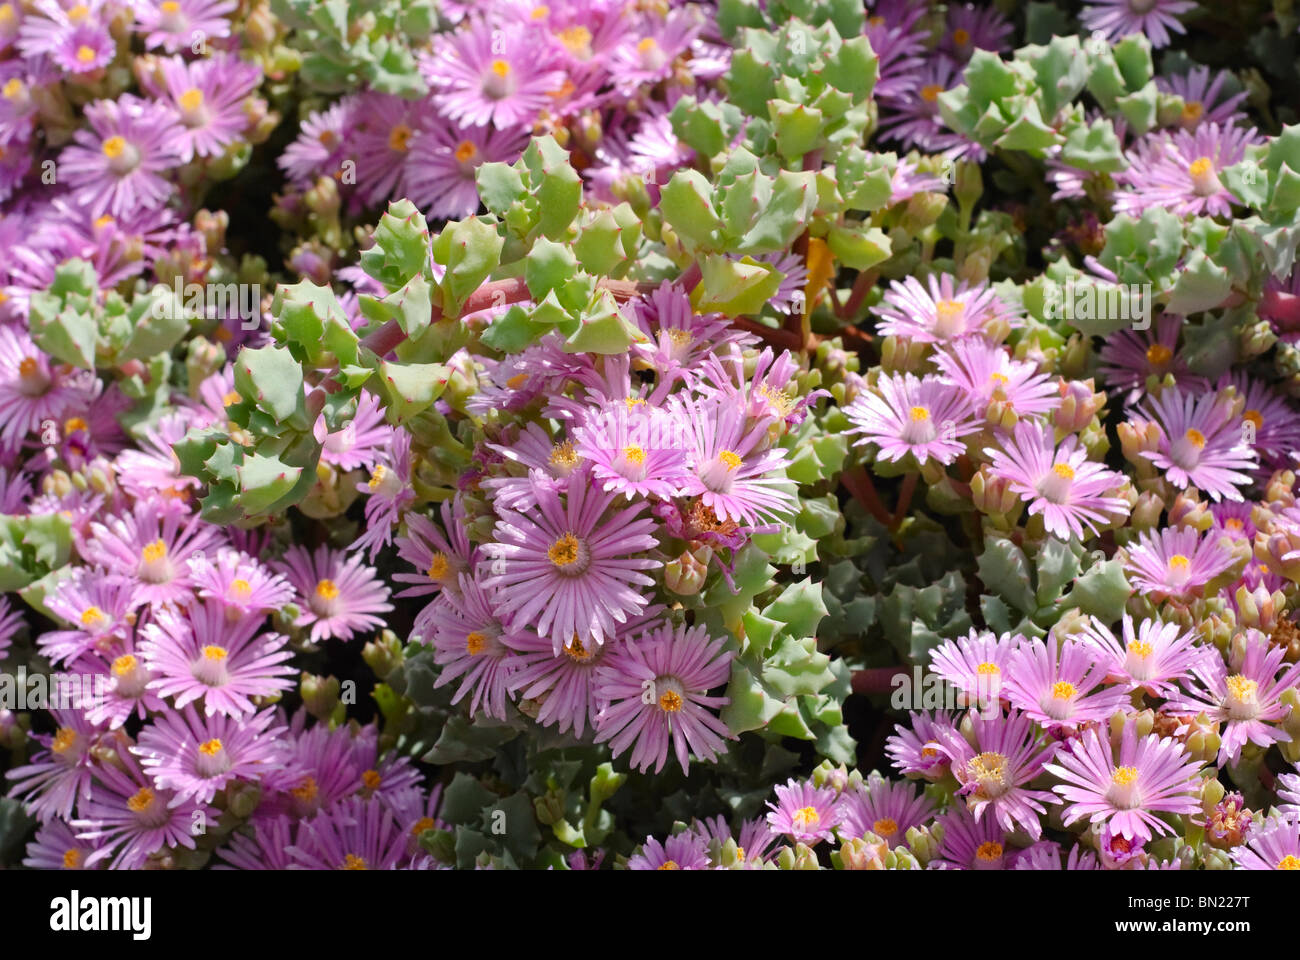 Lampranthus piquetbergensis, is an ice plant succulent in the family Aizoaceae. Spectacularly colorful blooms cover the plant. Stock Photo